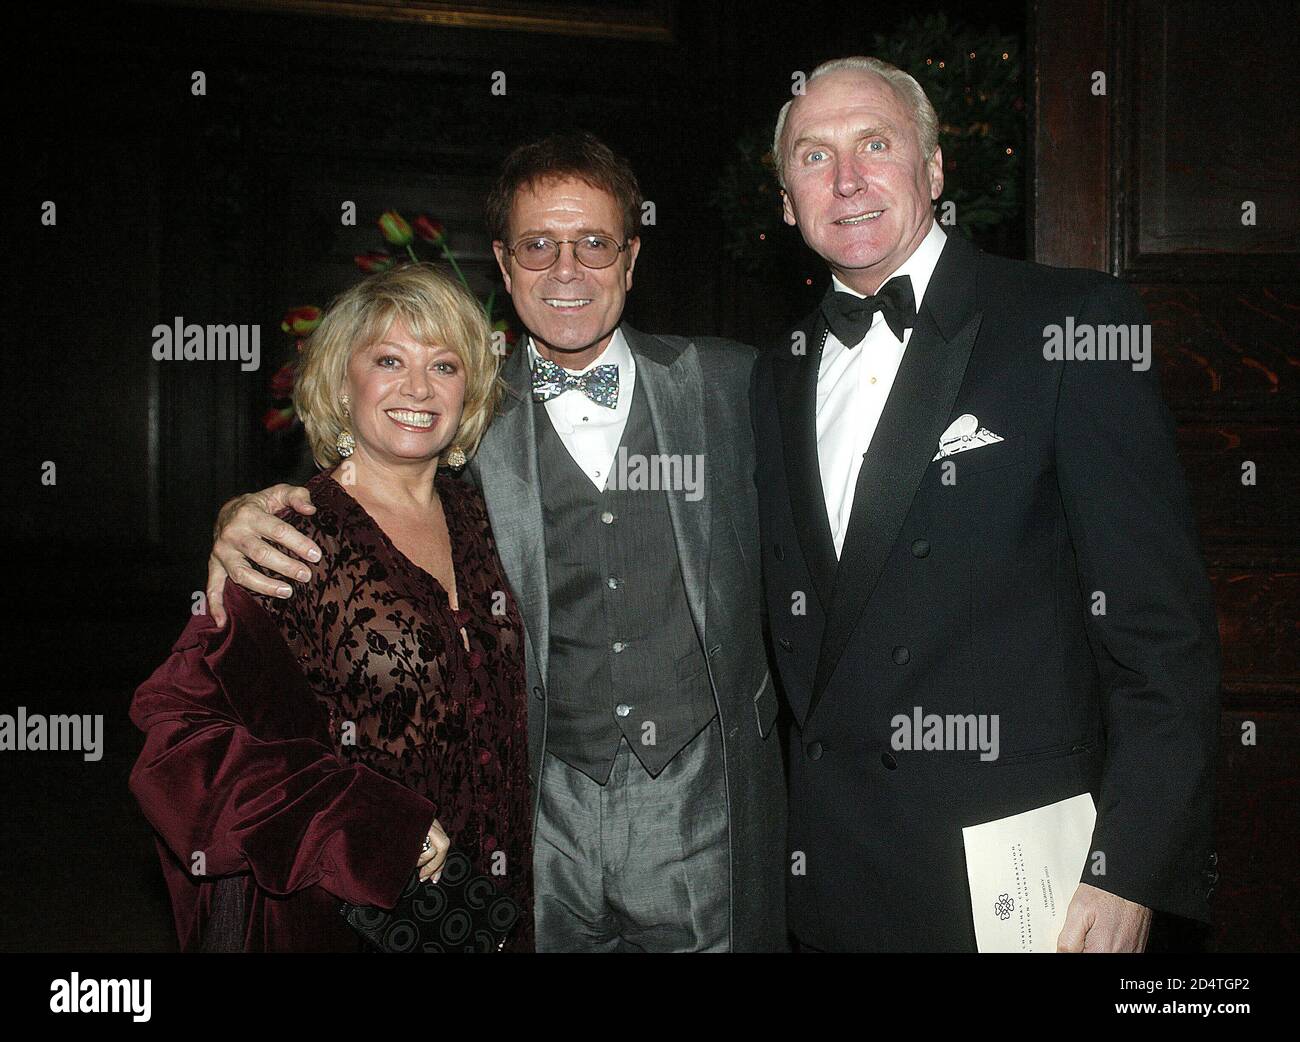 Cliff Richard's Tennis Foundation Dinner at Hampton Court 11th Dec 2003: Cliff Richard with Elaine Page and.. Stock Photo